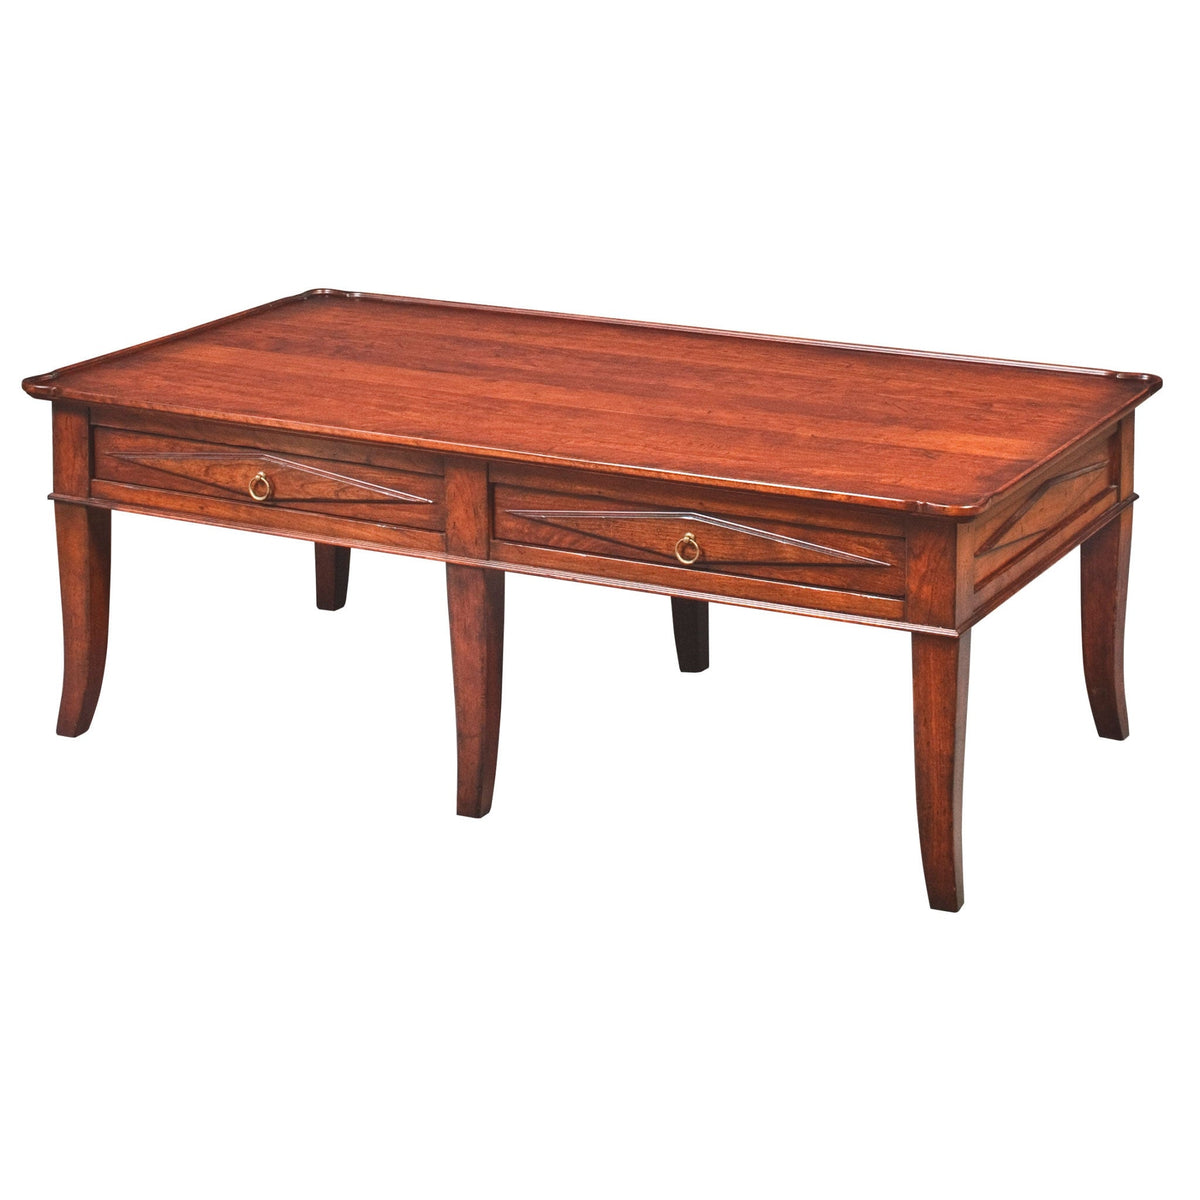 Victorian Coffee Table - snyders.furniture